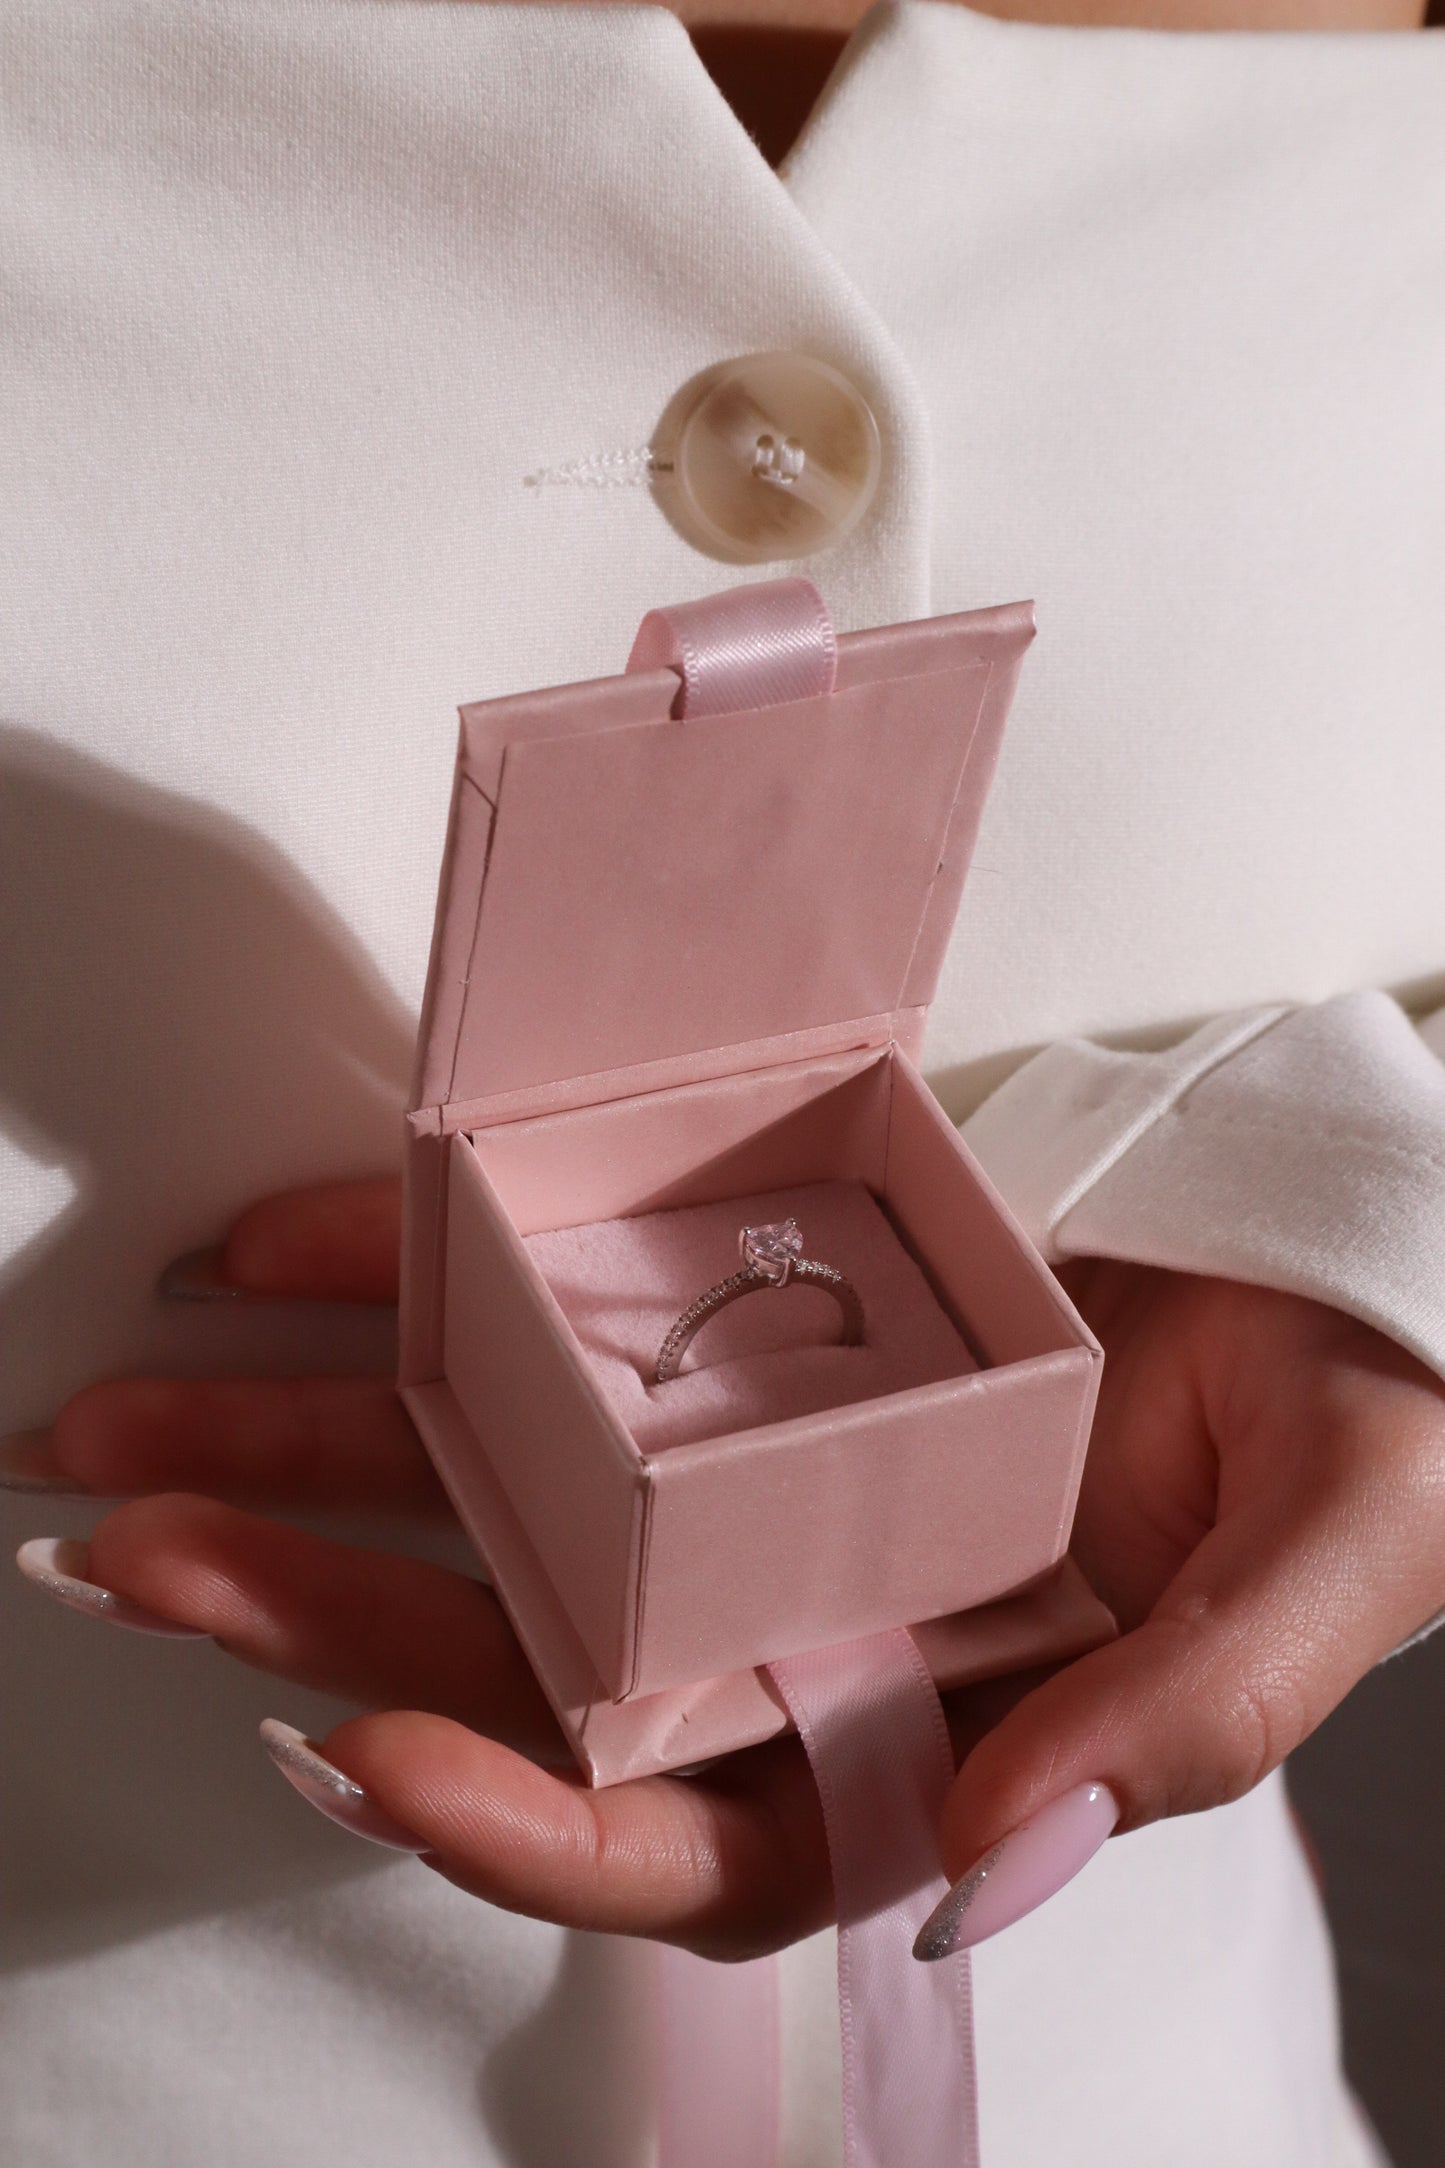 Brielle Sterling Silver Heart Ring